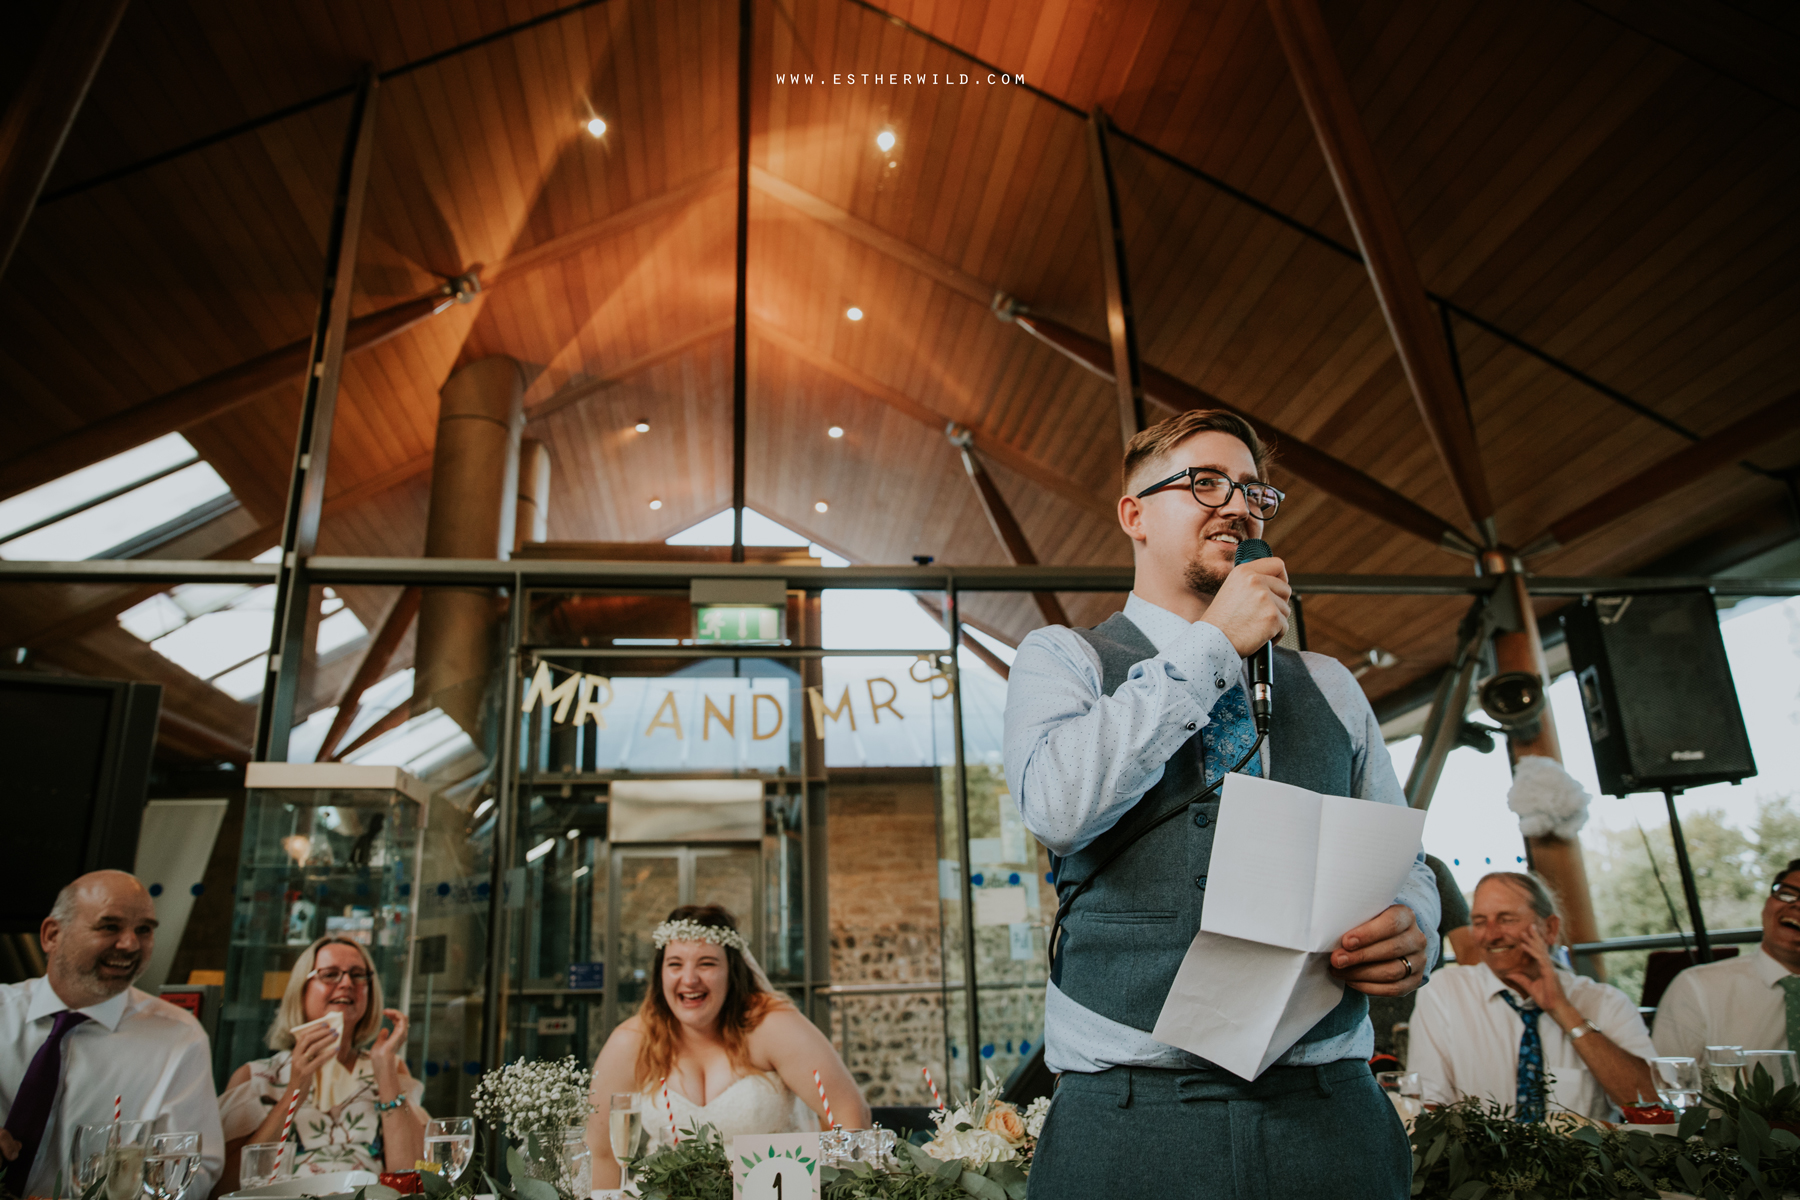 Norwich_Castle_Arcade_Grosvenor_Chip_Birdcage_Cathedral_Cloisters_Refectory_Wedding_Photography_Esther_Wild_Photographer_Norfolk_Kings_Lynn_3R8A2572.jpg